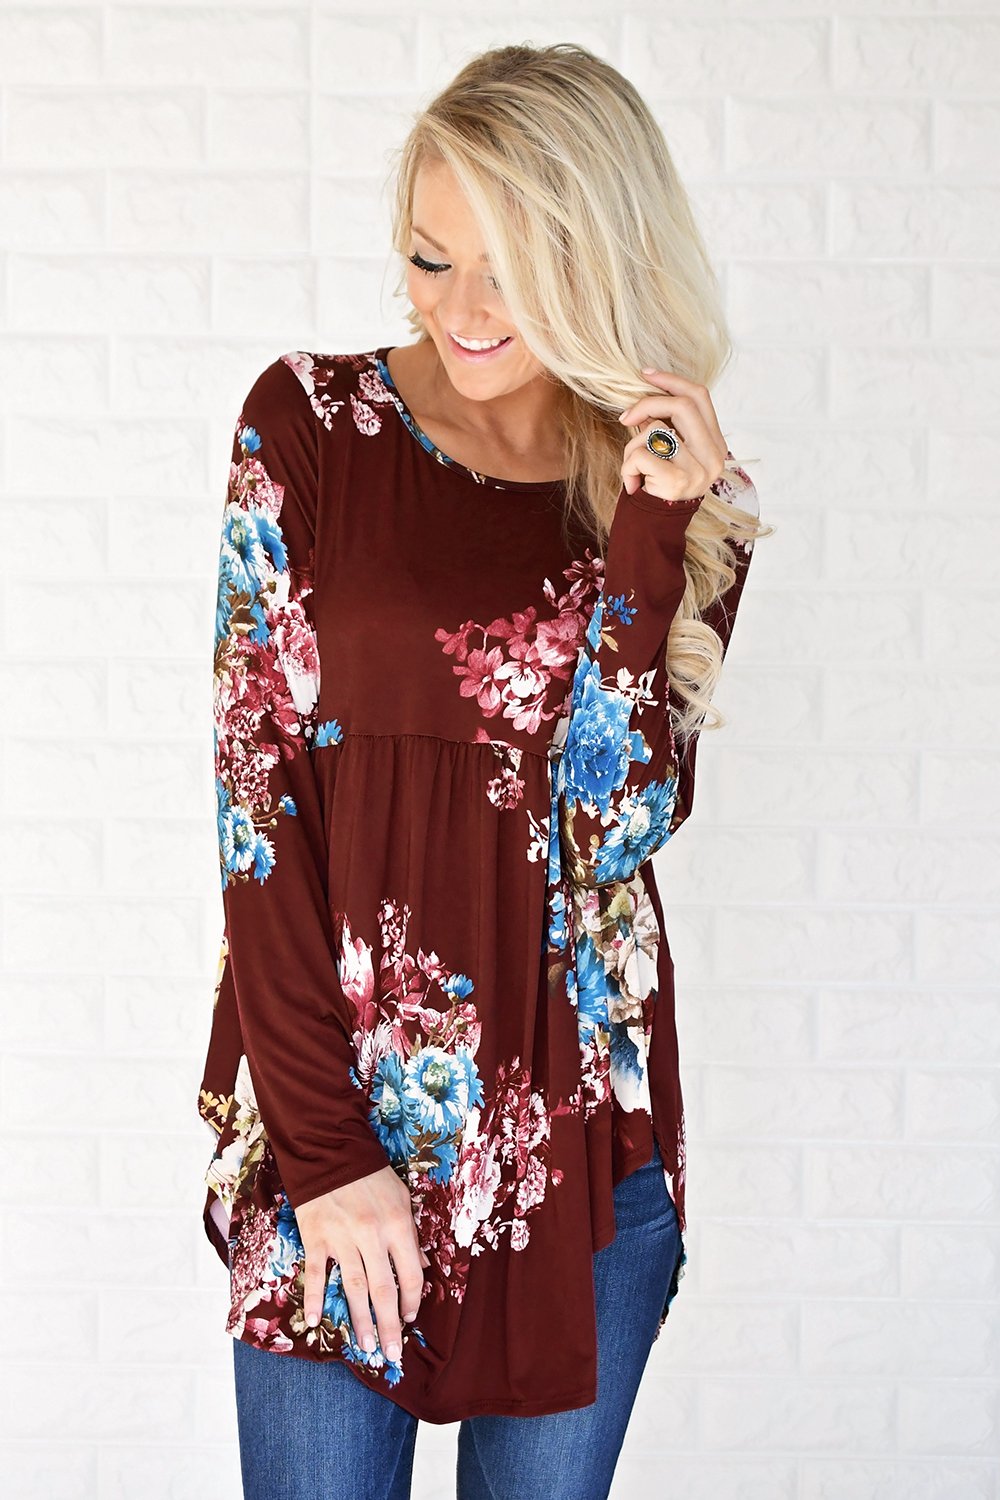 All About Tonight Burgundy Floral Top